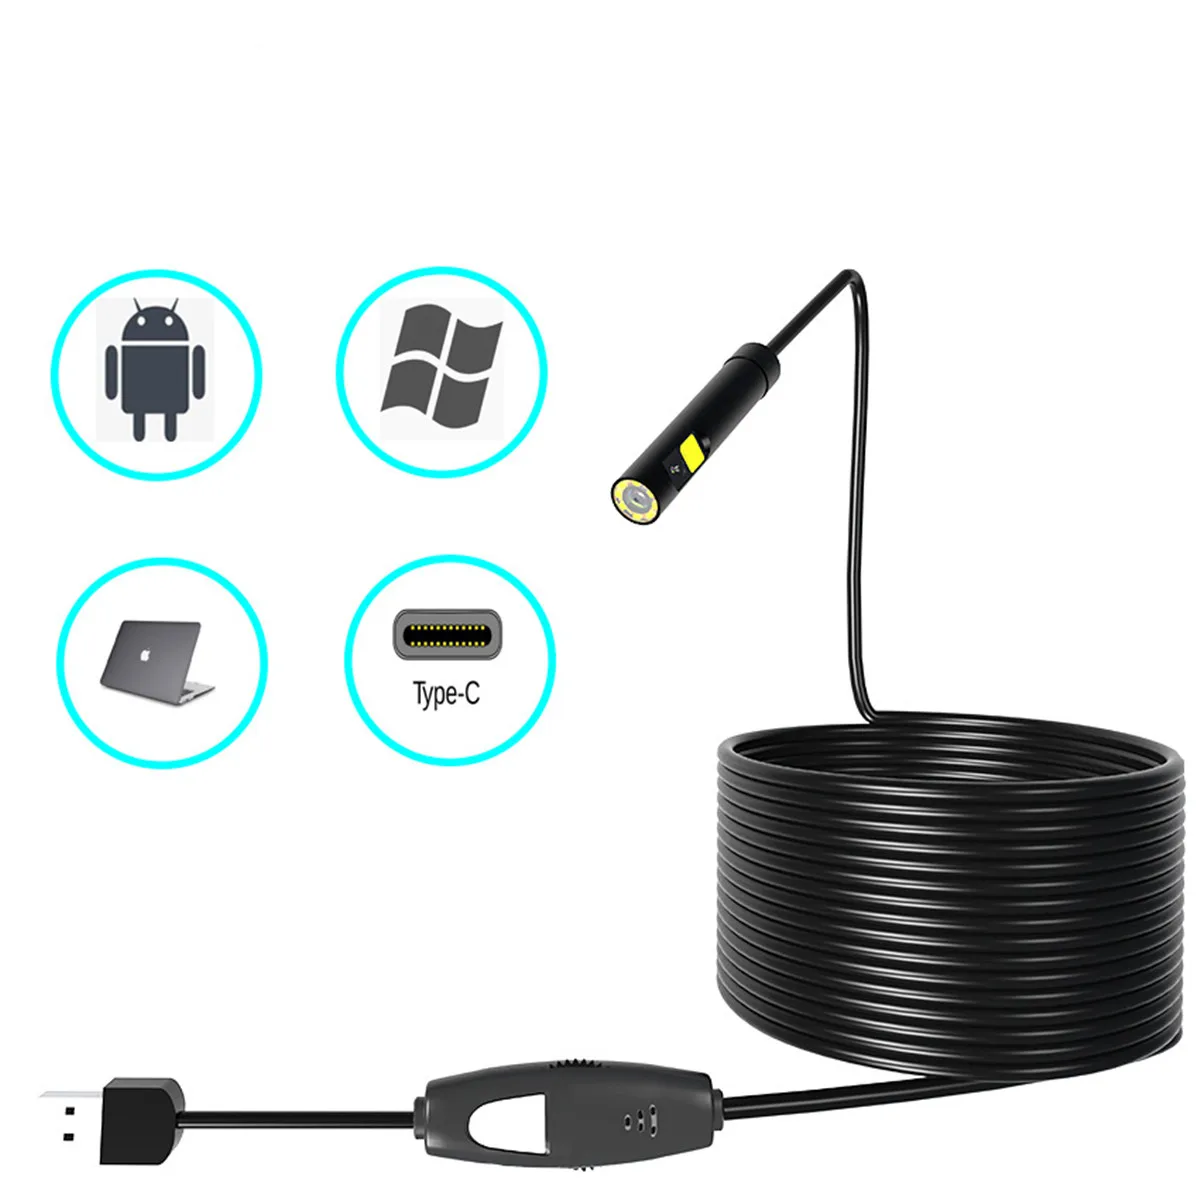 2MP 8MM 3in1 USB Dual Lens Endoscope Camera For Android&Computer CMOS Borescope Inspection  Digital Microscope Otoscope 5mp 1944p 3in1 usb endoscope camera for android pc cmos borescope auto focal otoscope camera